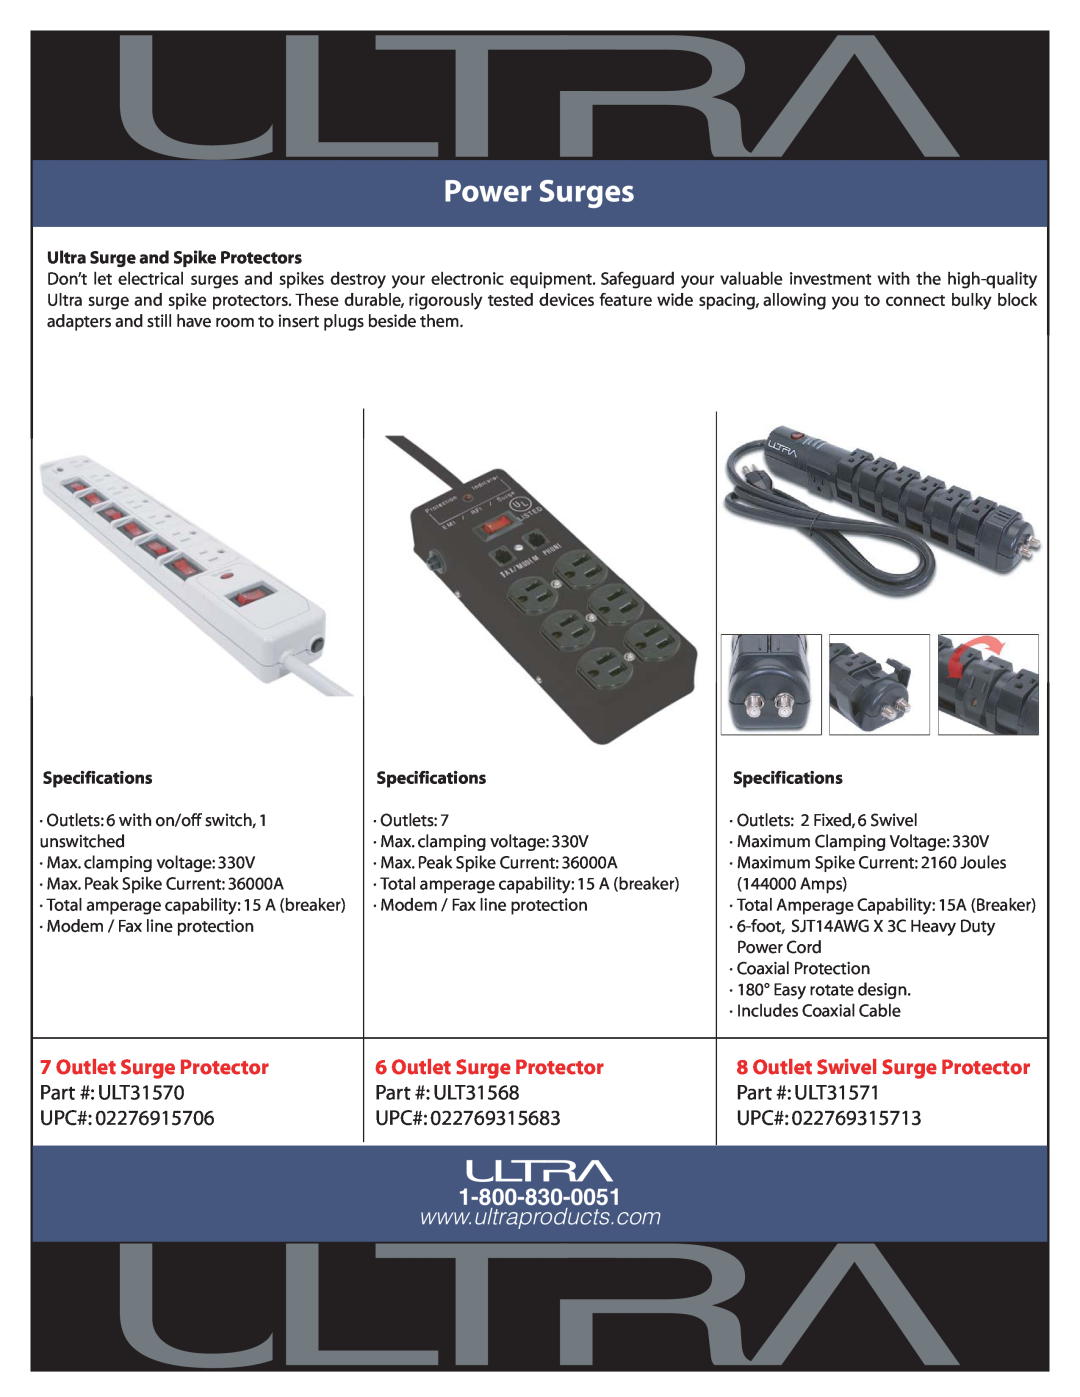 Ultra Products specifications Power Surges, Upc#, Outlet Swivel Surge Protector ULT31571, Specifications 